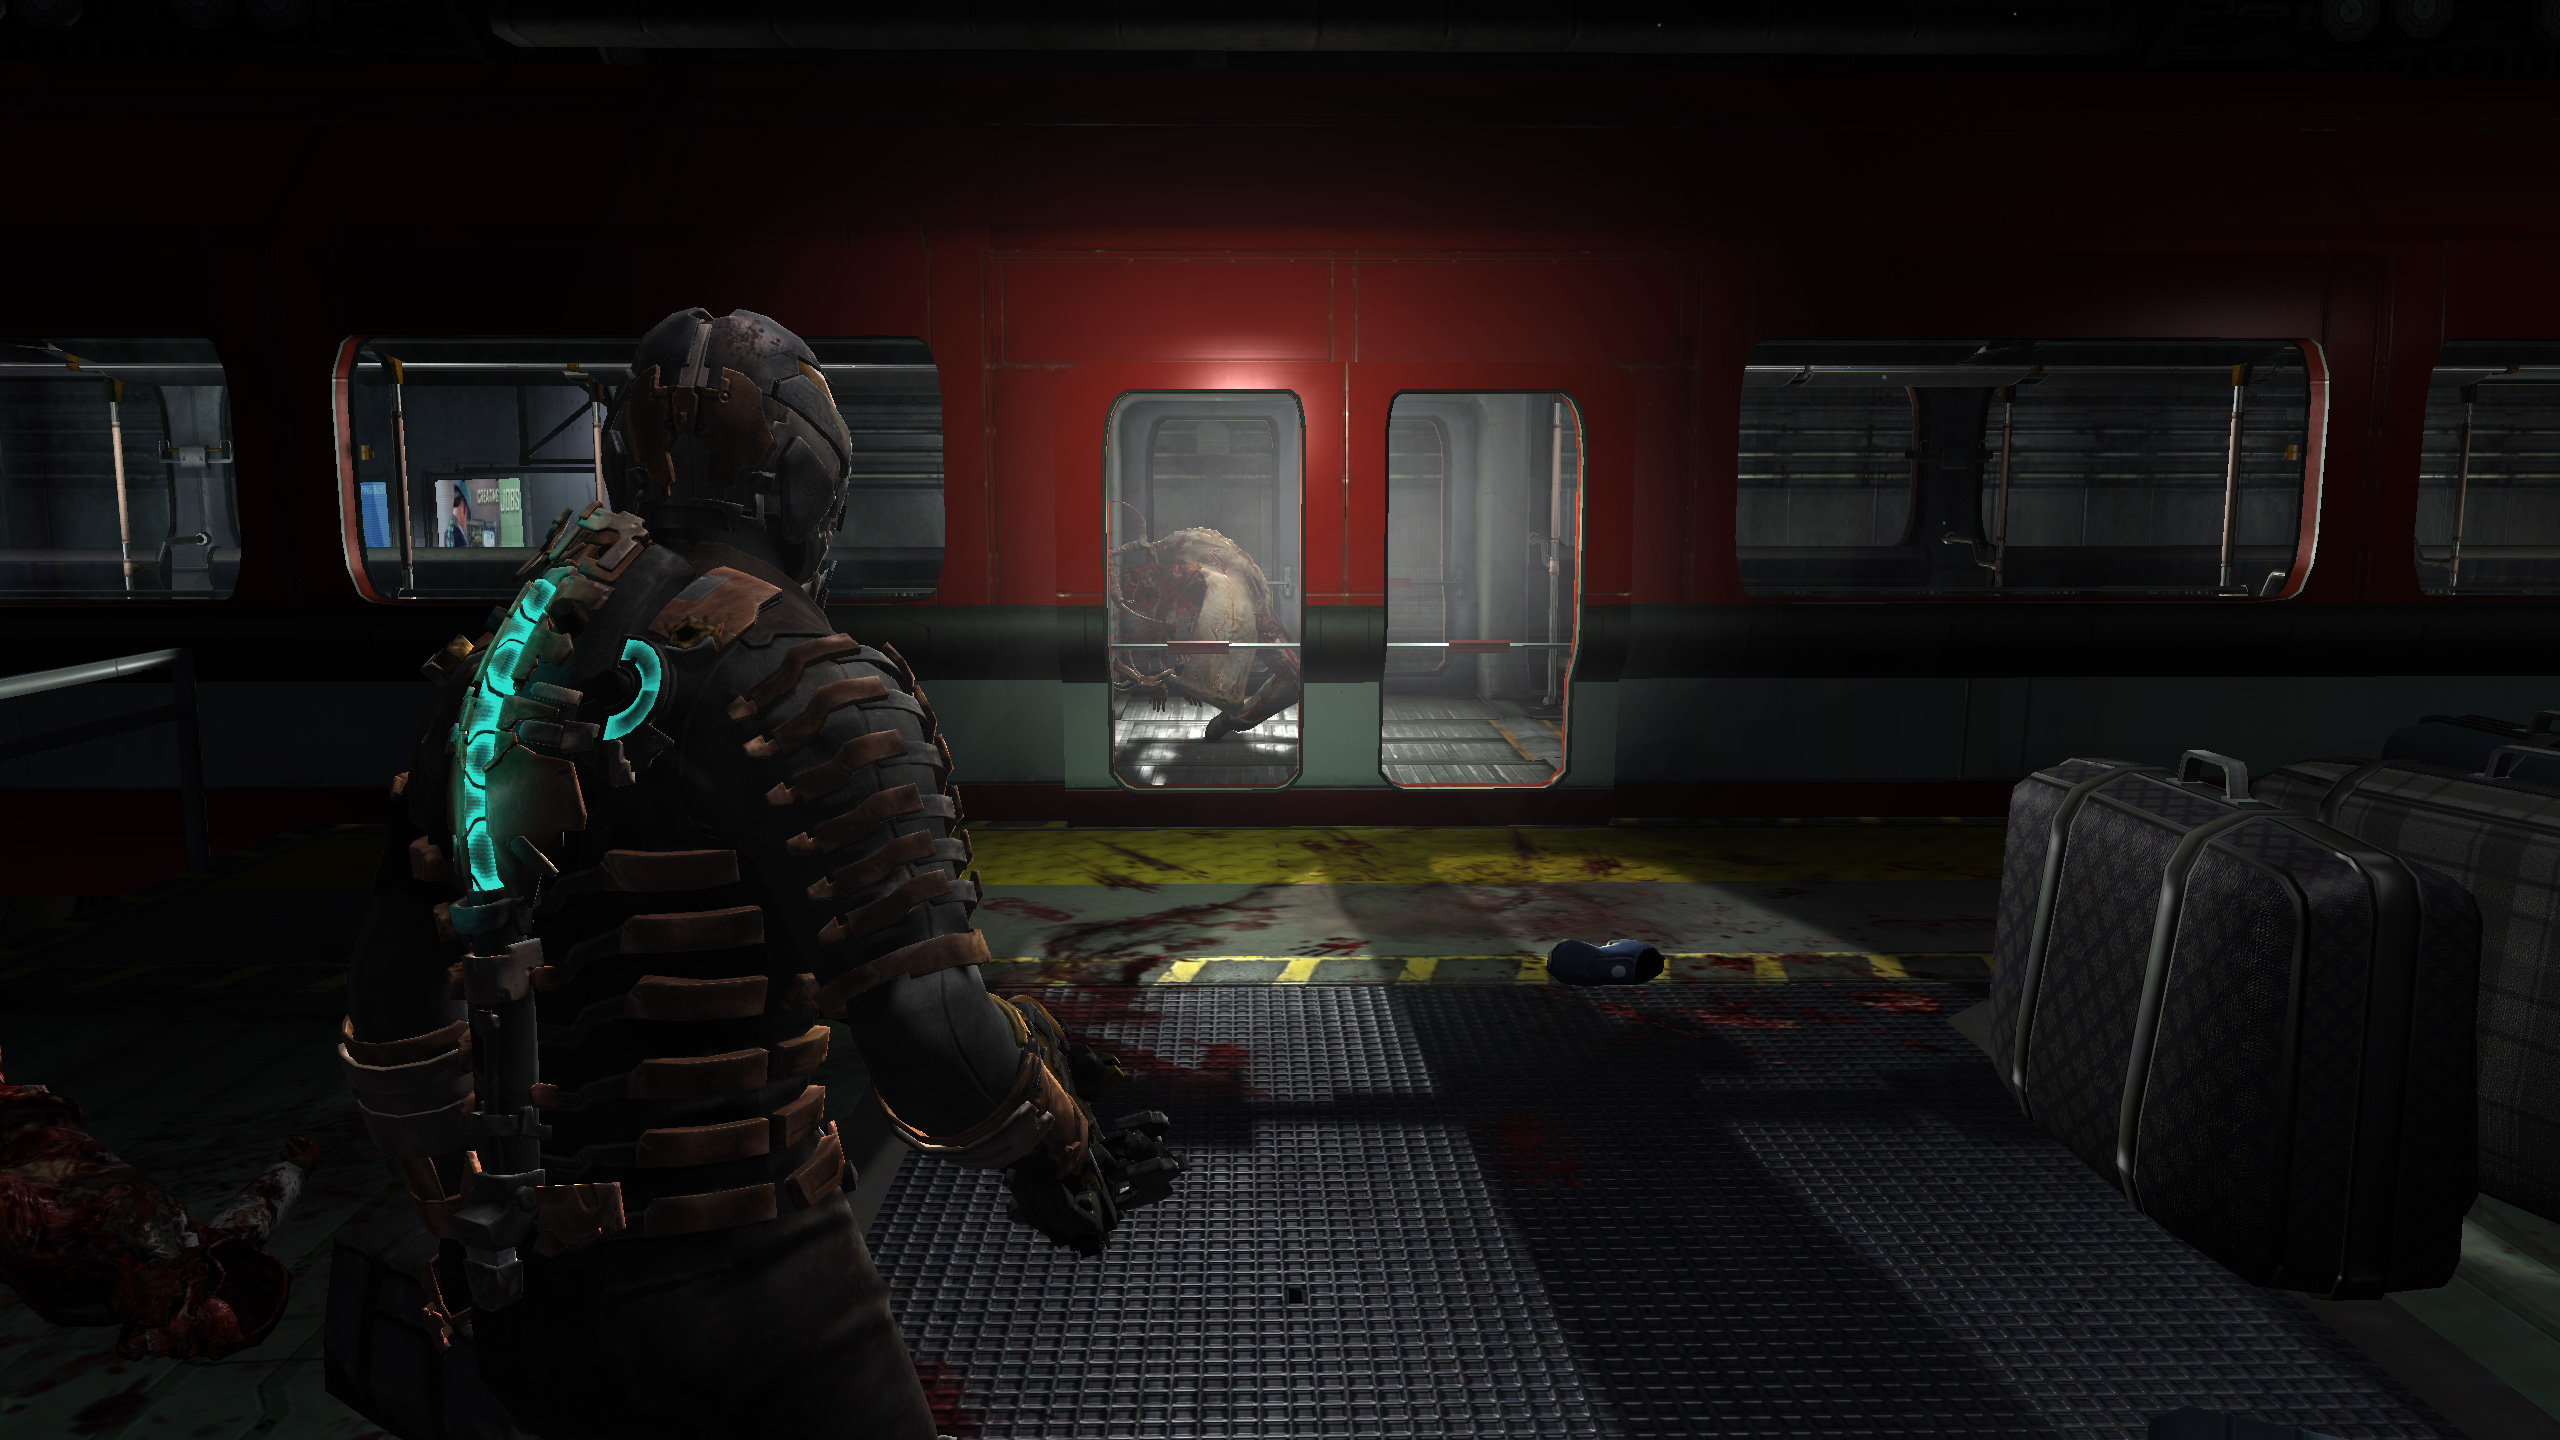  Dead Space 2 : Video Games